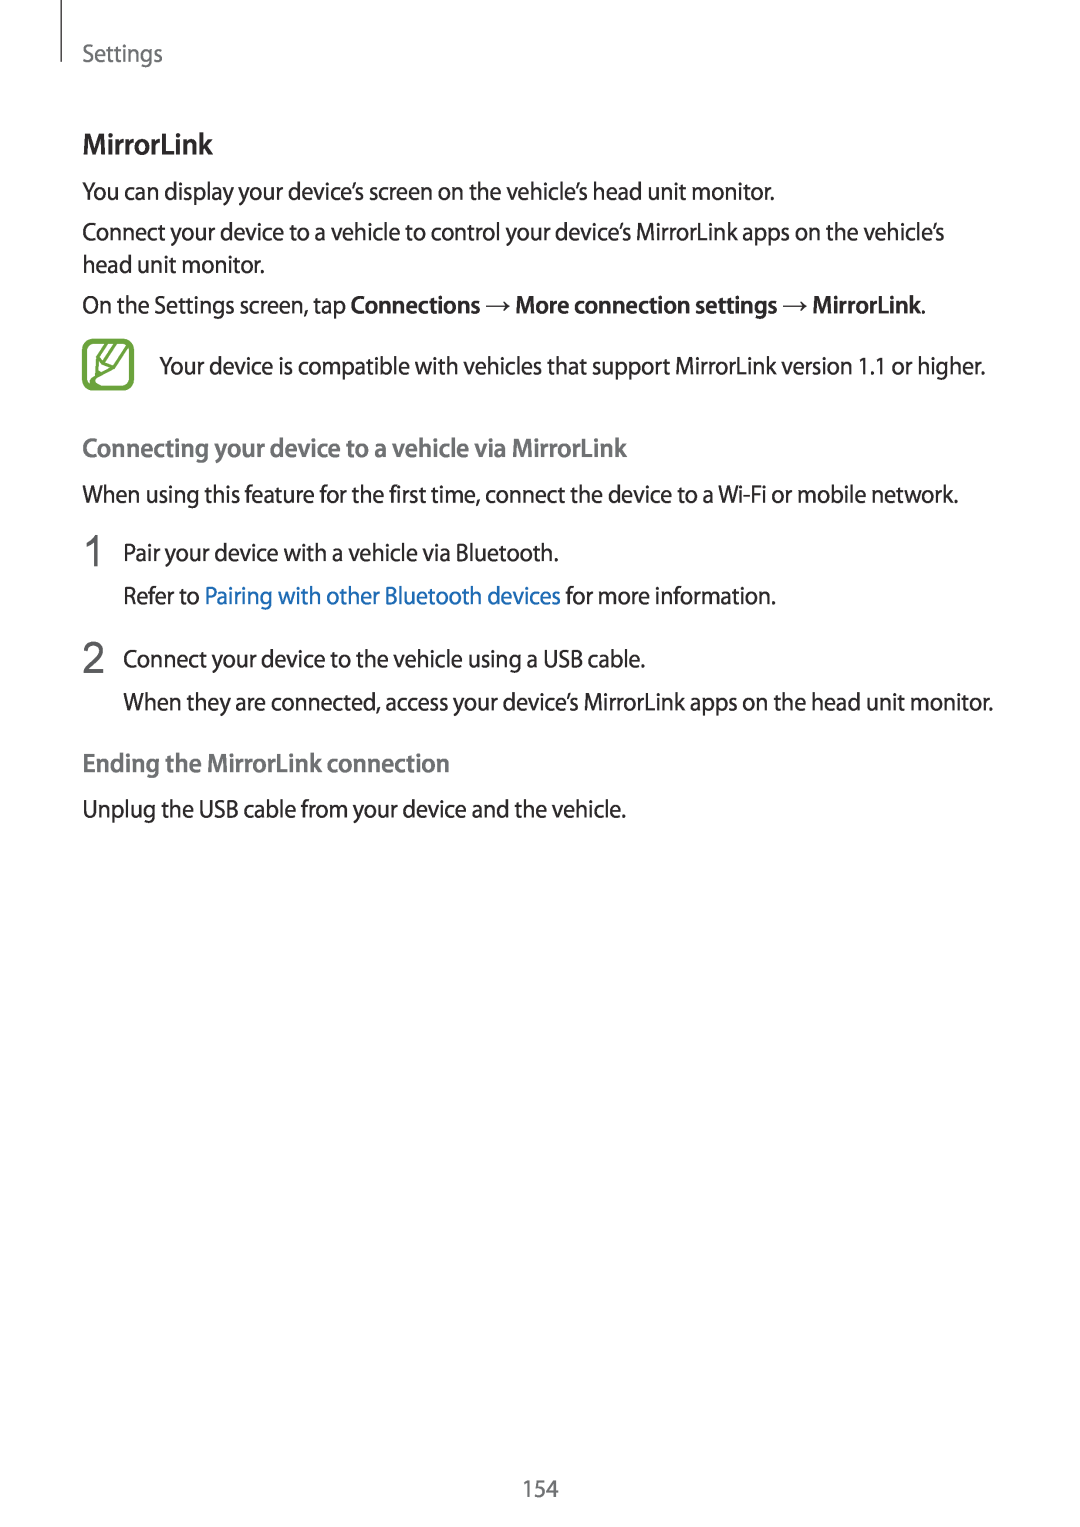 Samsung SM-A530FZKGKSA Connecting your device to a vehicle via MirrorLink, Ending the MirrorLink connection, Settings 